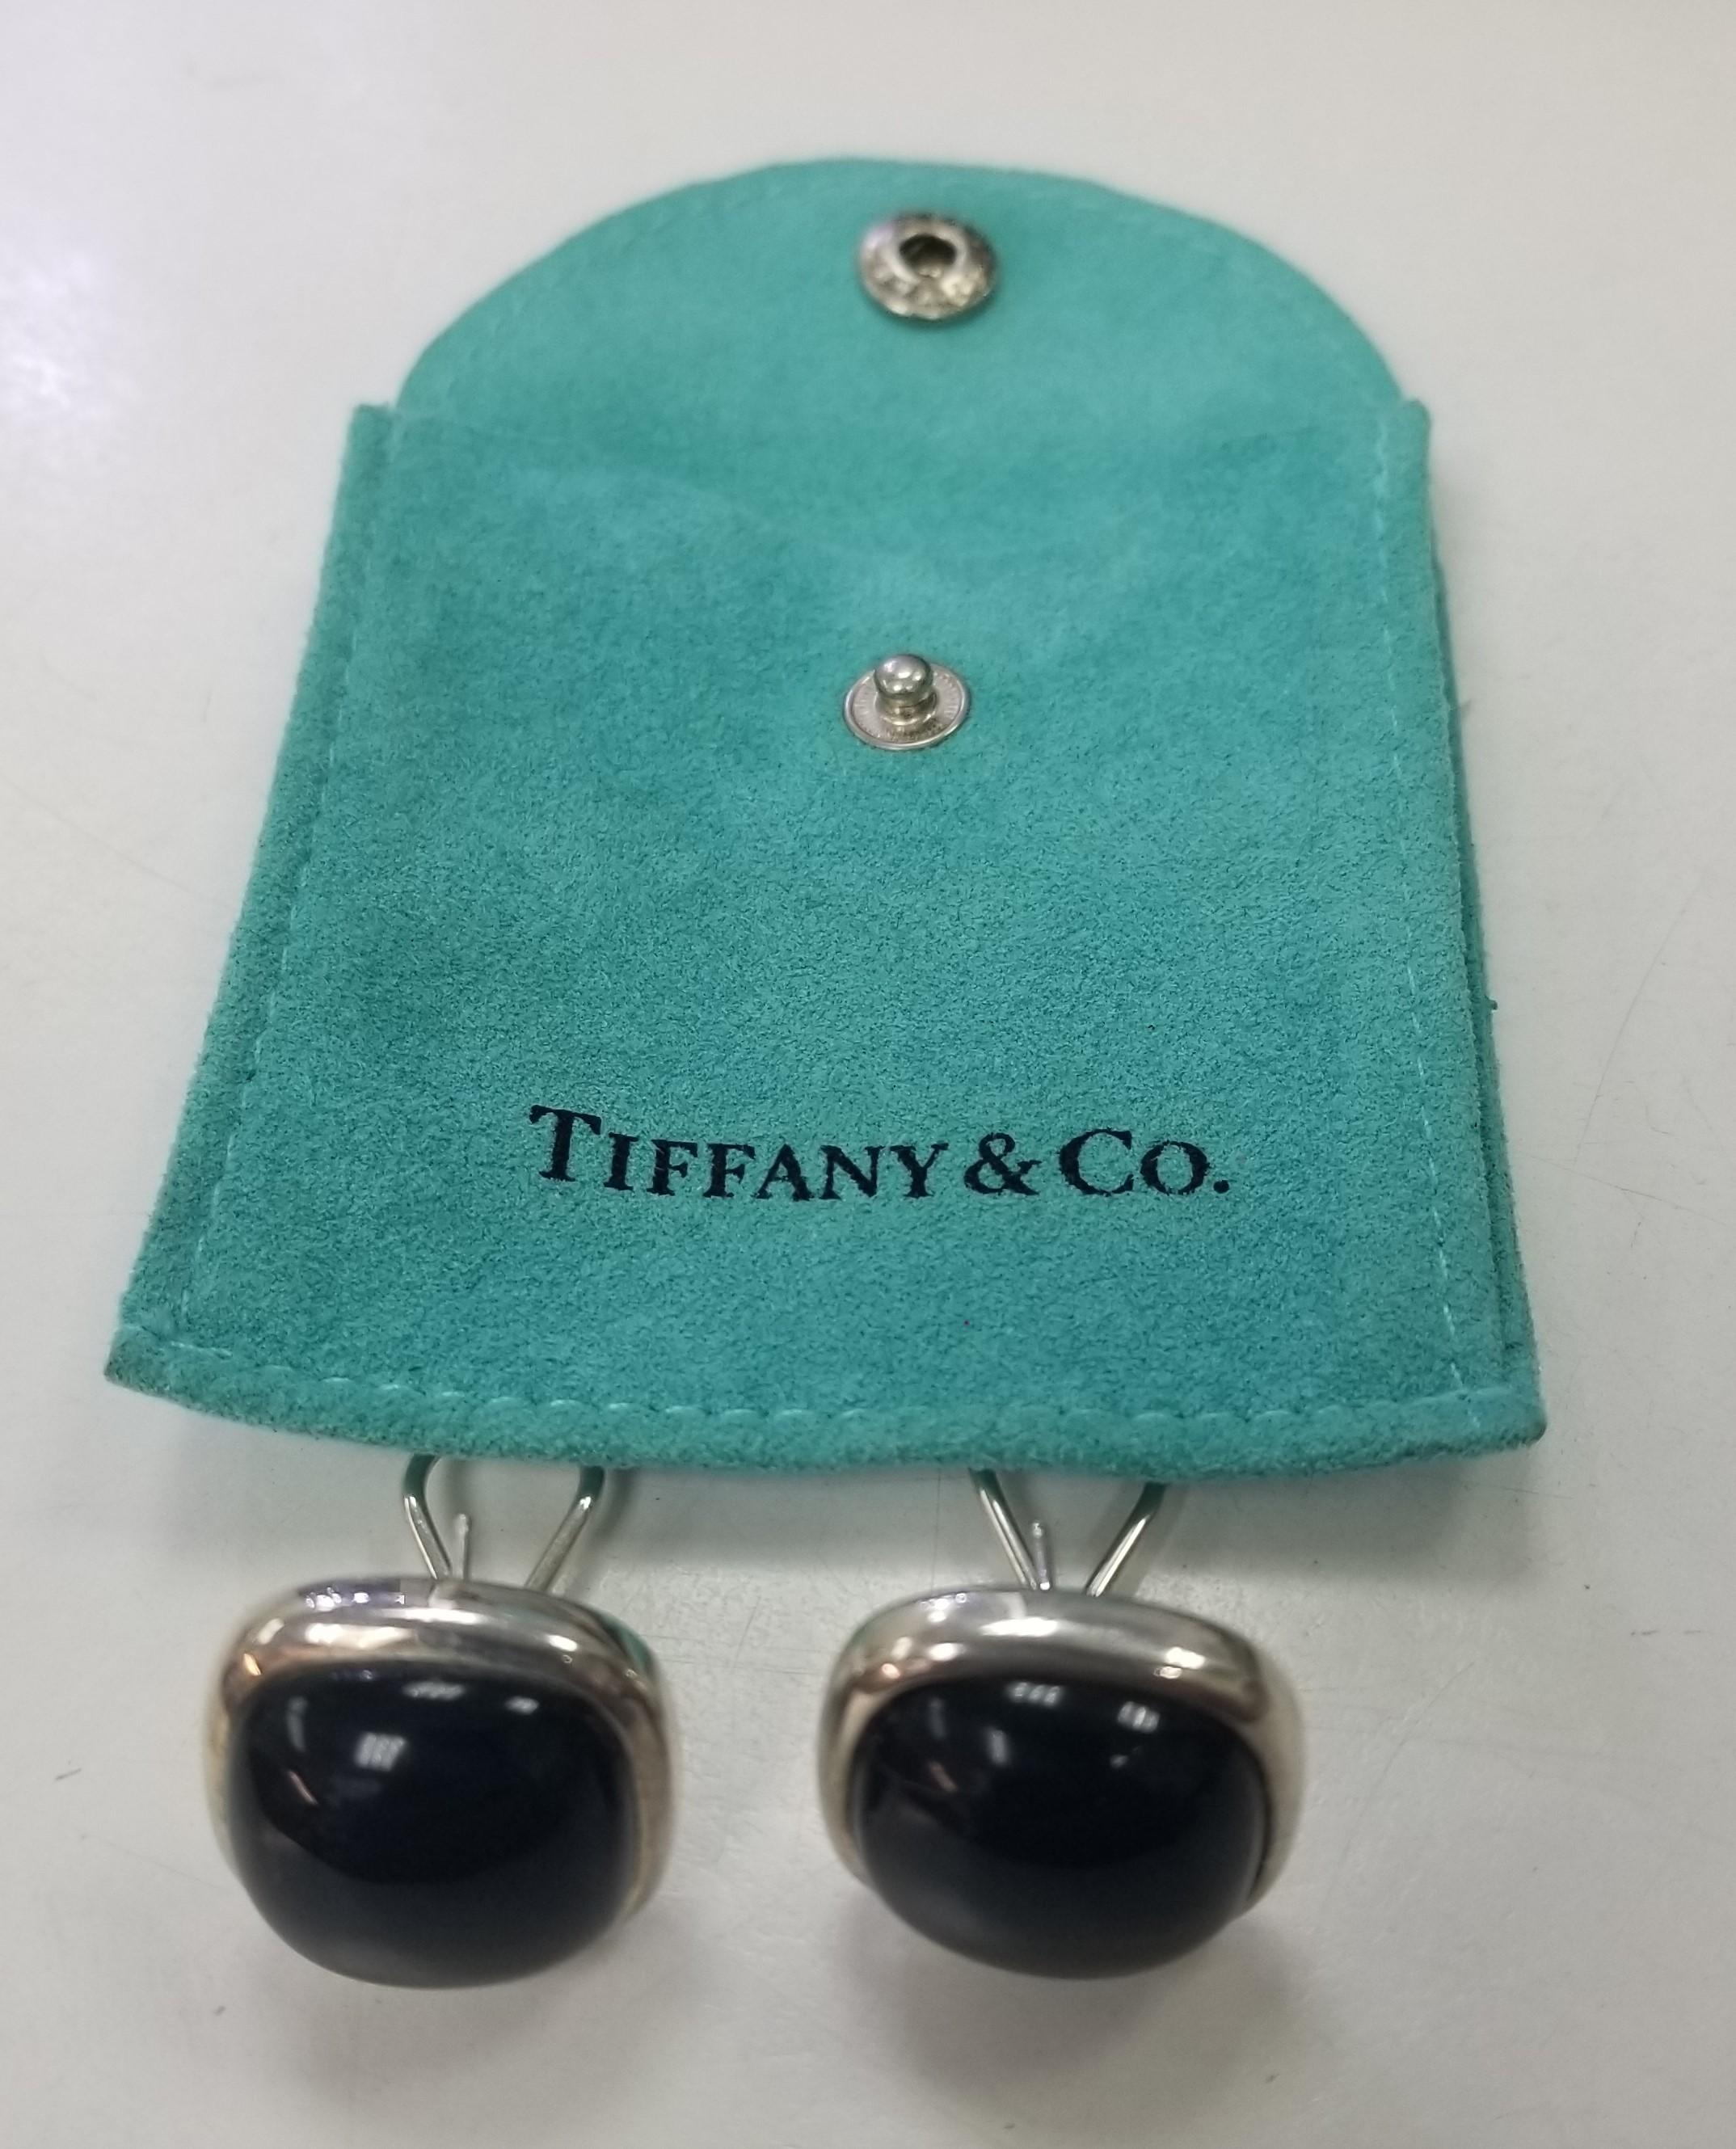 Item specifics
“GREAT CONDITION”
Brand Tiffany & Co.
Type Earrings
Metal Purity 925
Style OMEGA CLI[P
Metal Sterling Silver
Main Stone Onyx
And Pouch